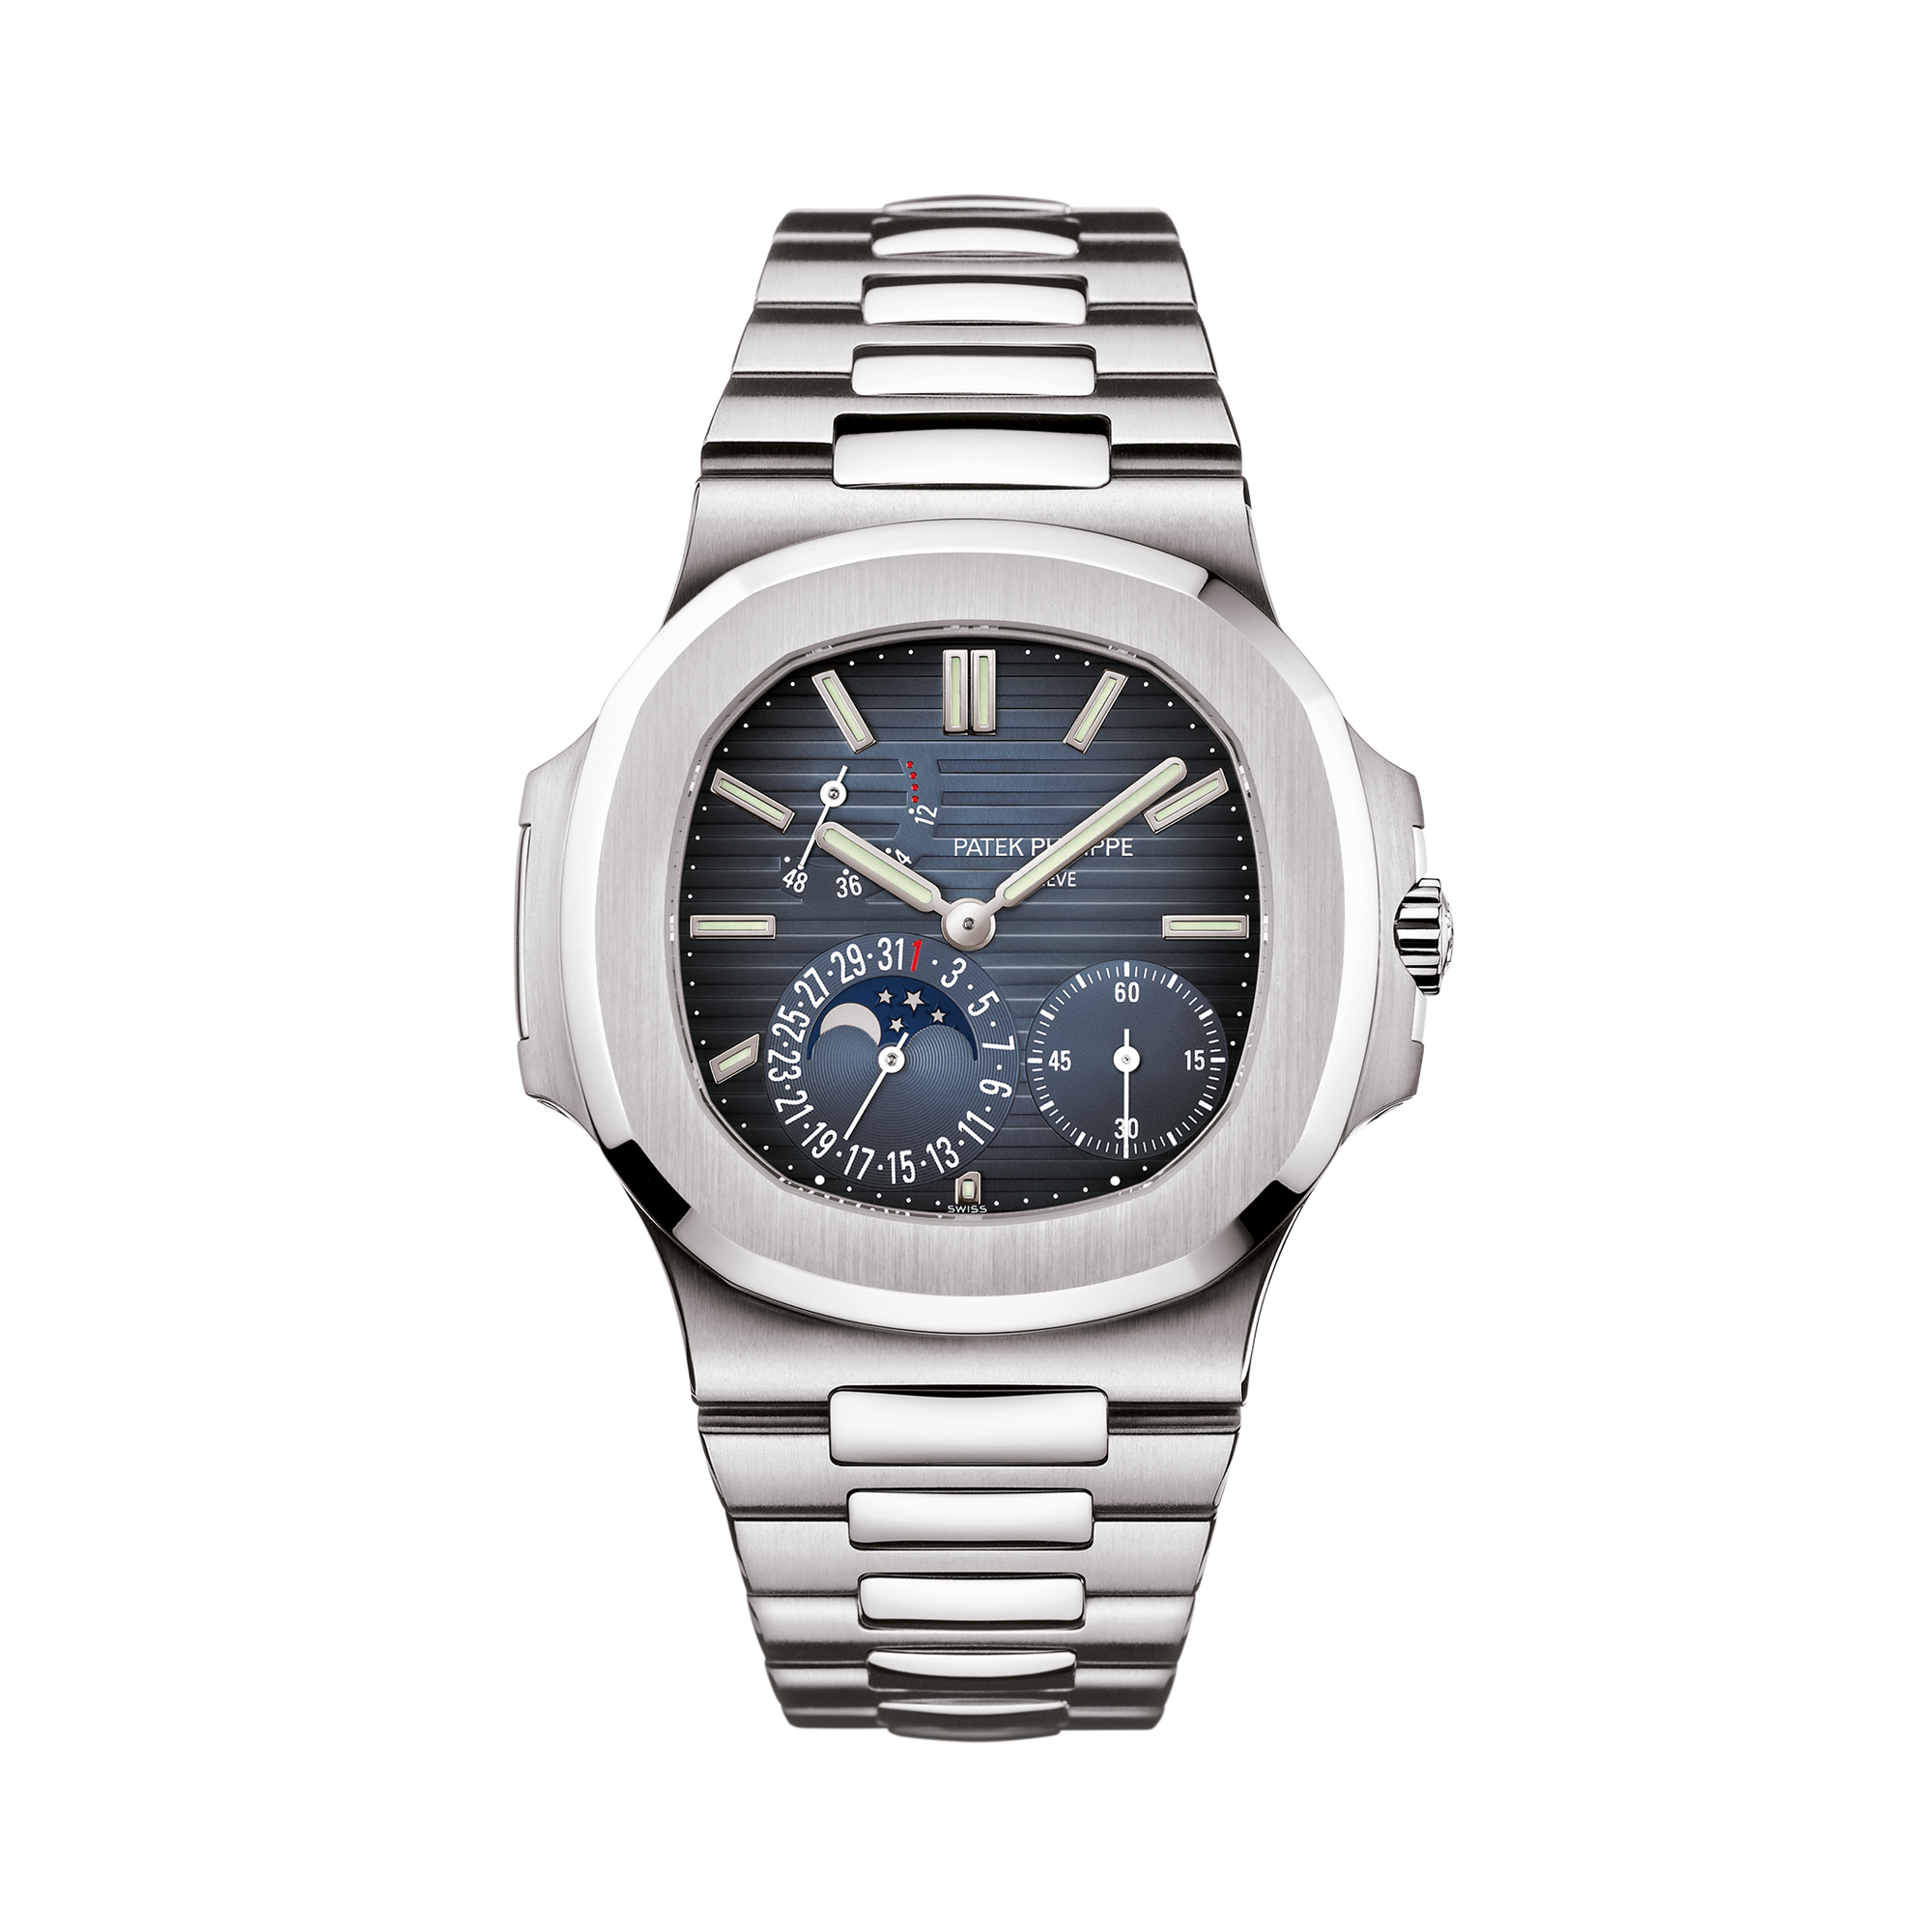 Patek Philippe Nautilus in Stainless Steel | 5712-1A-001 | Pragnell